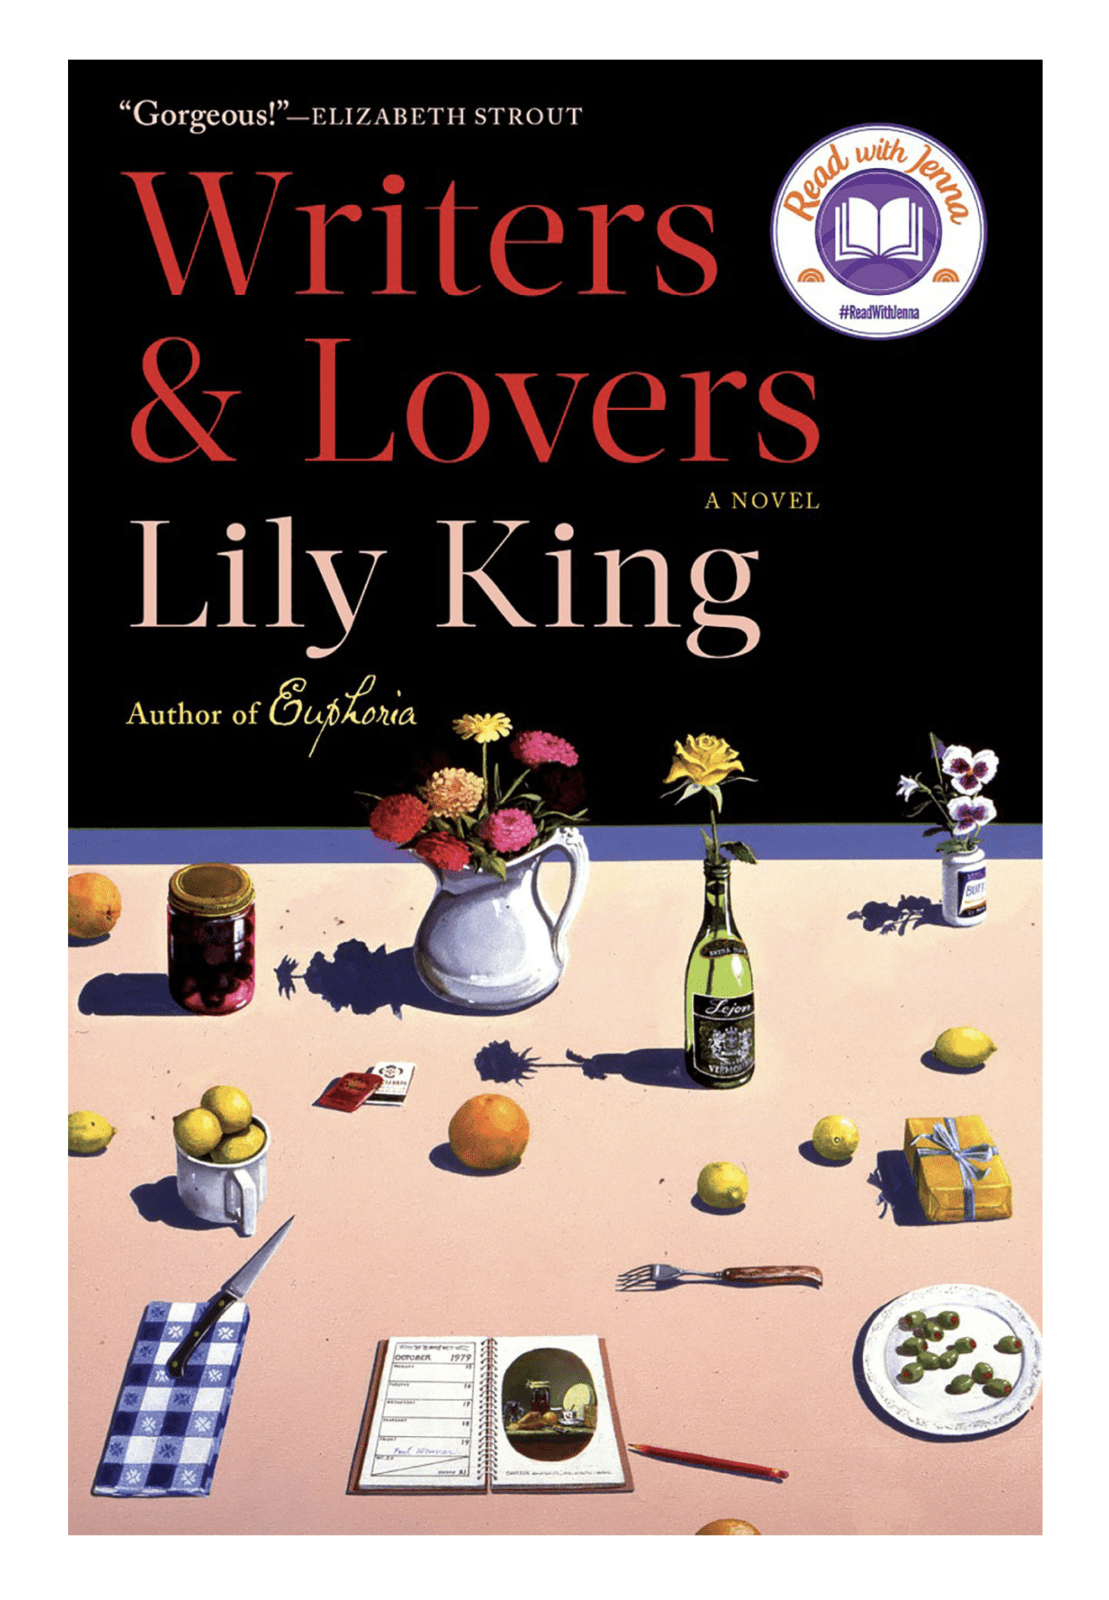 Things I Loved in May 2022: Writers & Lovers by Lily King | Wit & Delight